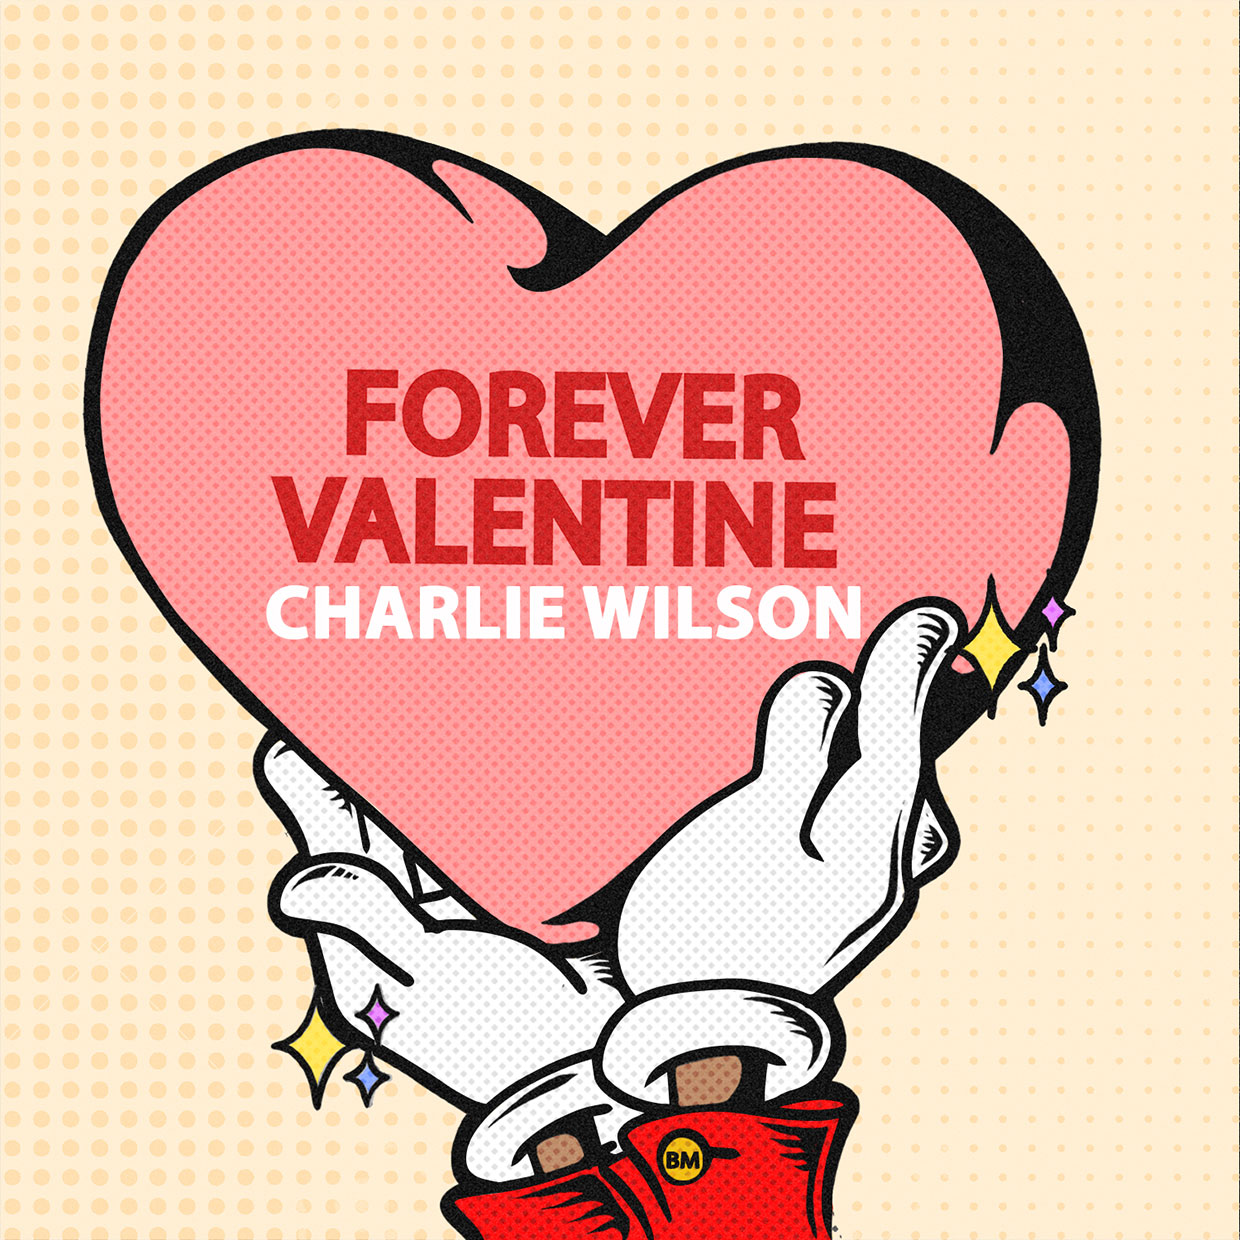 Charlie Wilson Set to Release New Single "Forever Valentine" Co-Written by Bruno Mars